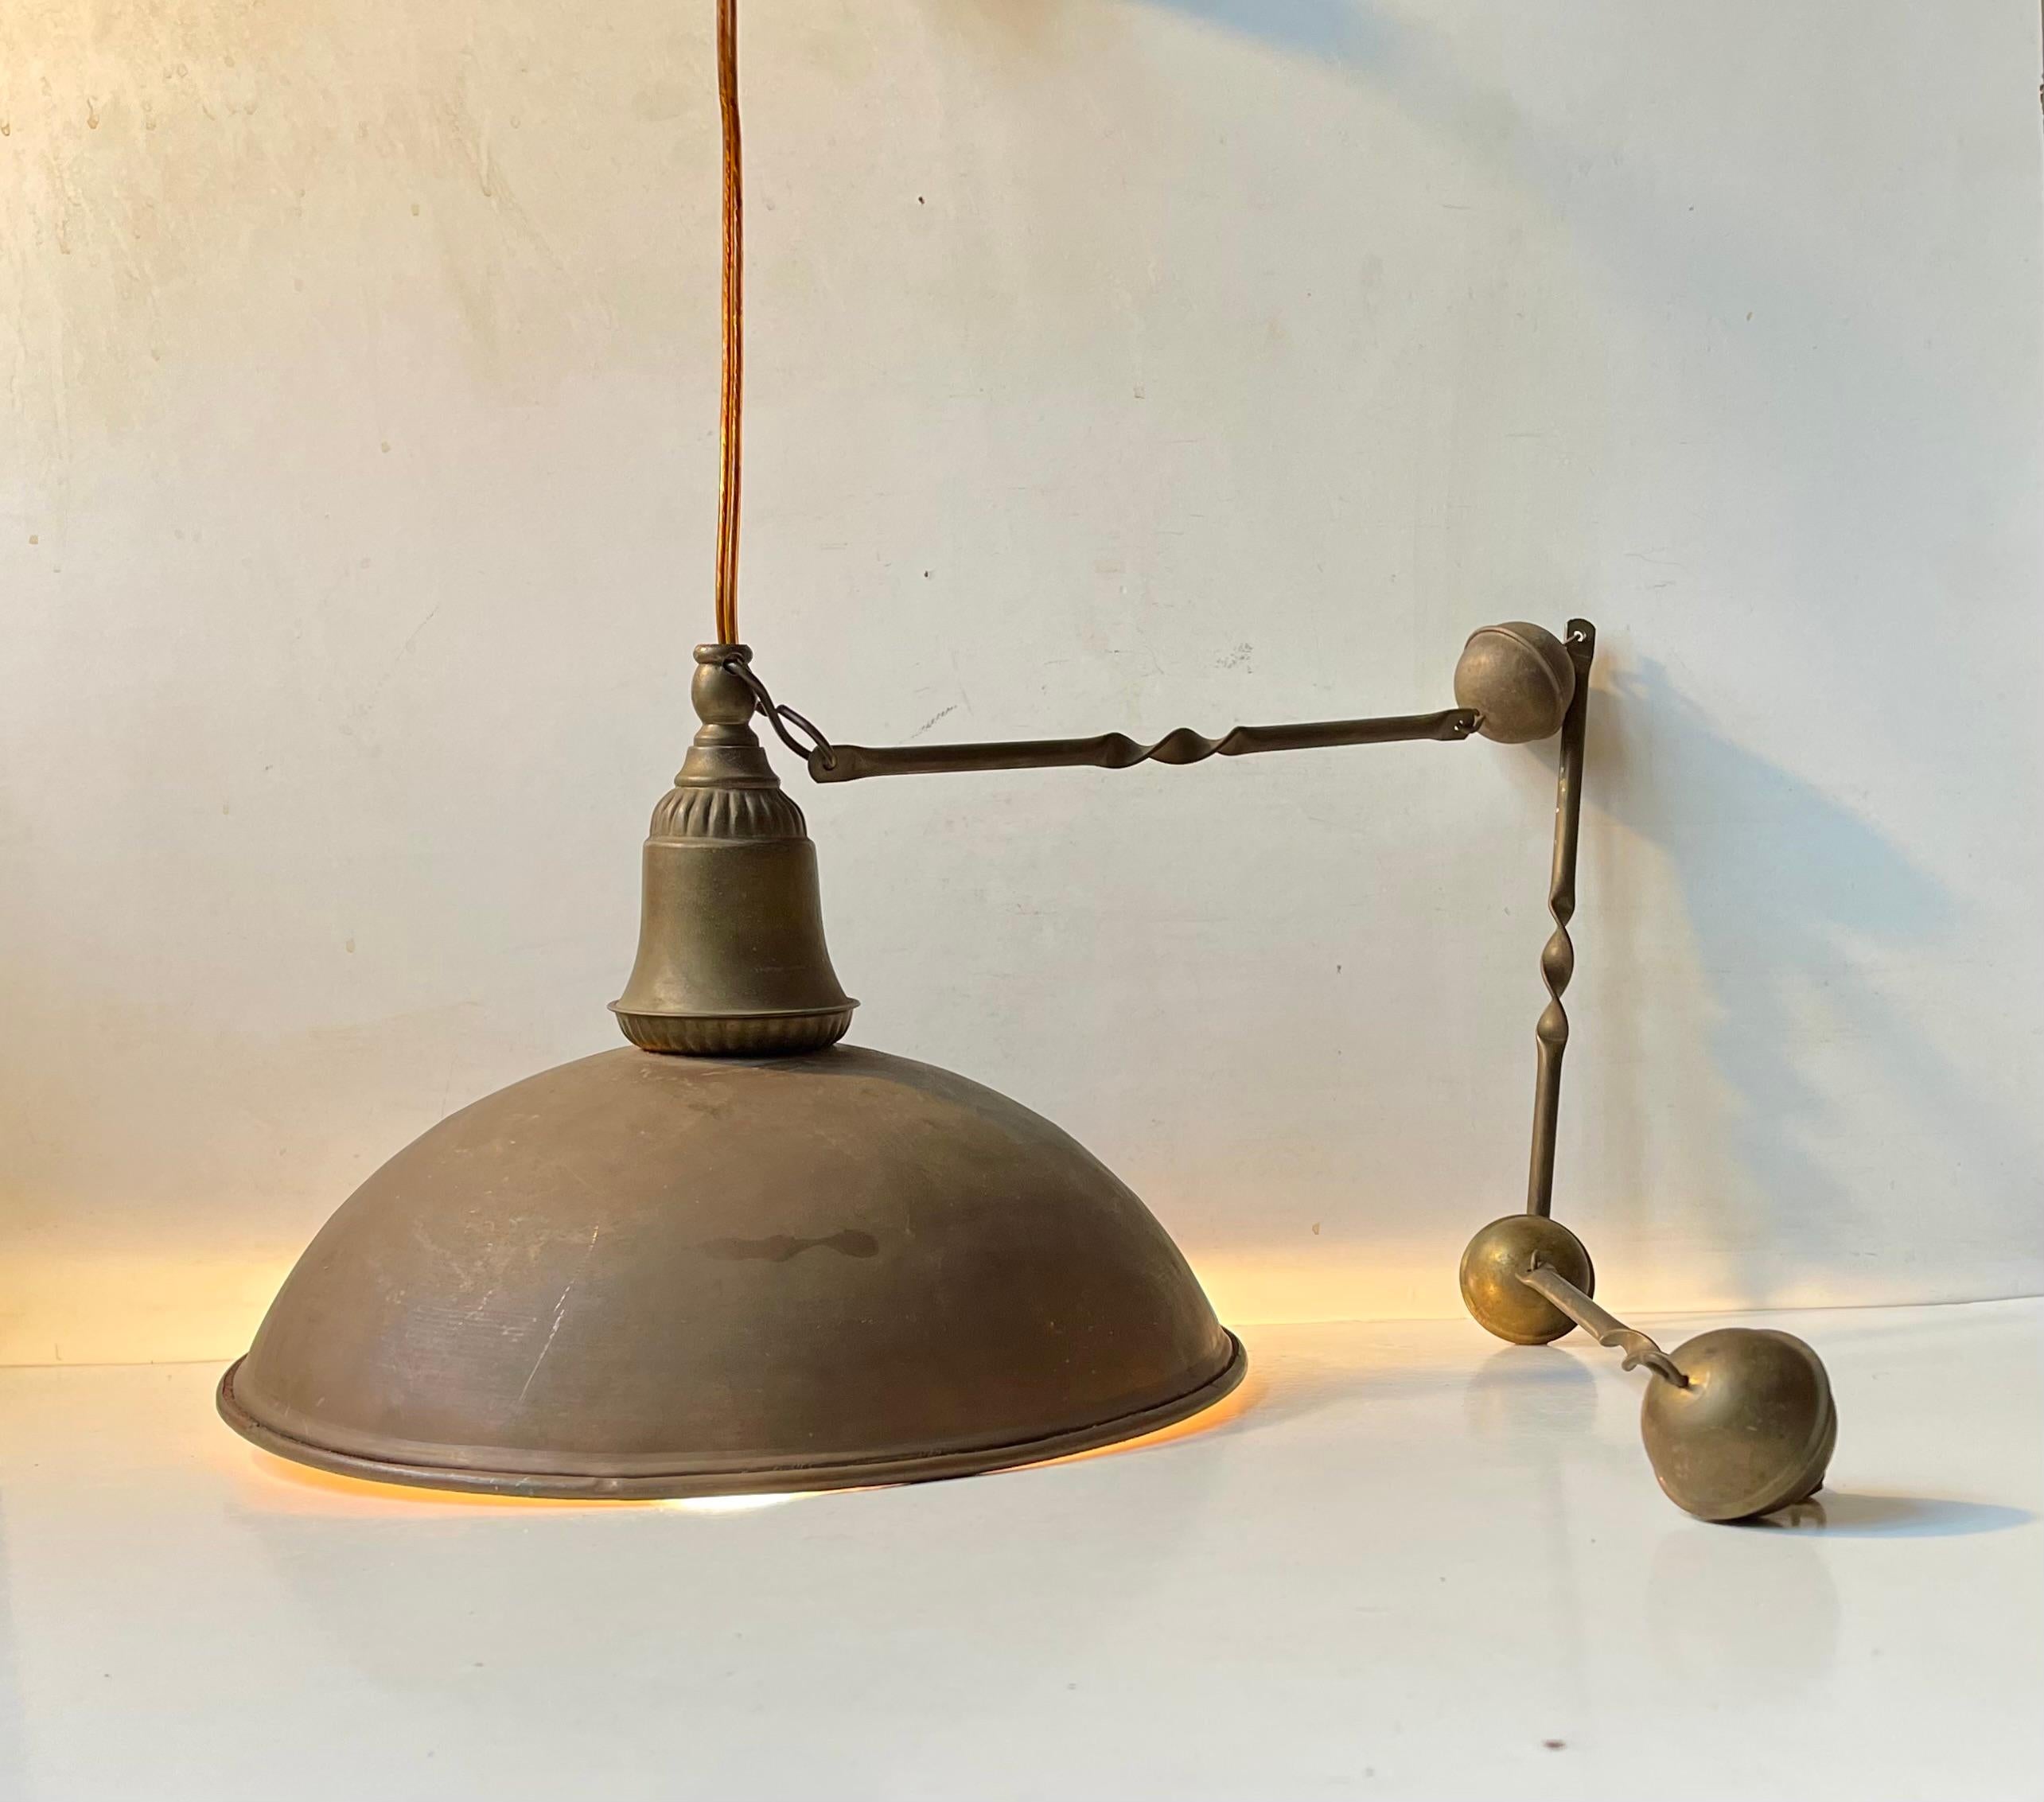 Its not just authentic looking it is authentic. A very patinated nautical ceiling pendant lamp composed of a solid copper shade, an ornamented solid brass top and an unusual ornamental chain also in solid brass. It was recently salvaged from a State